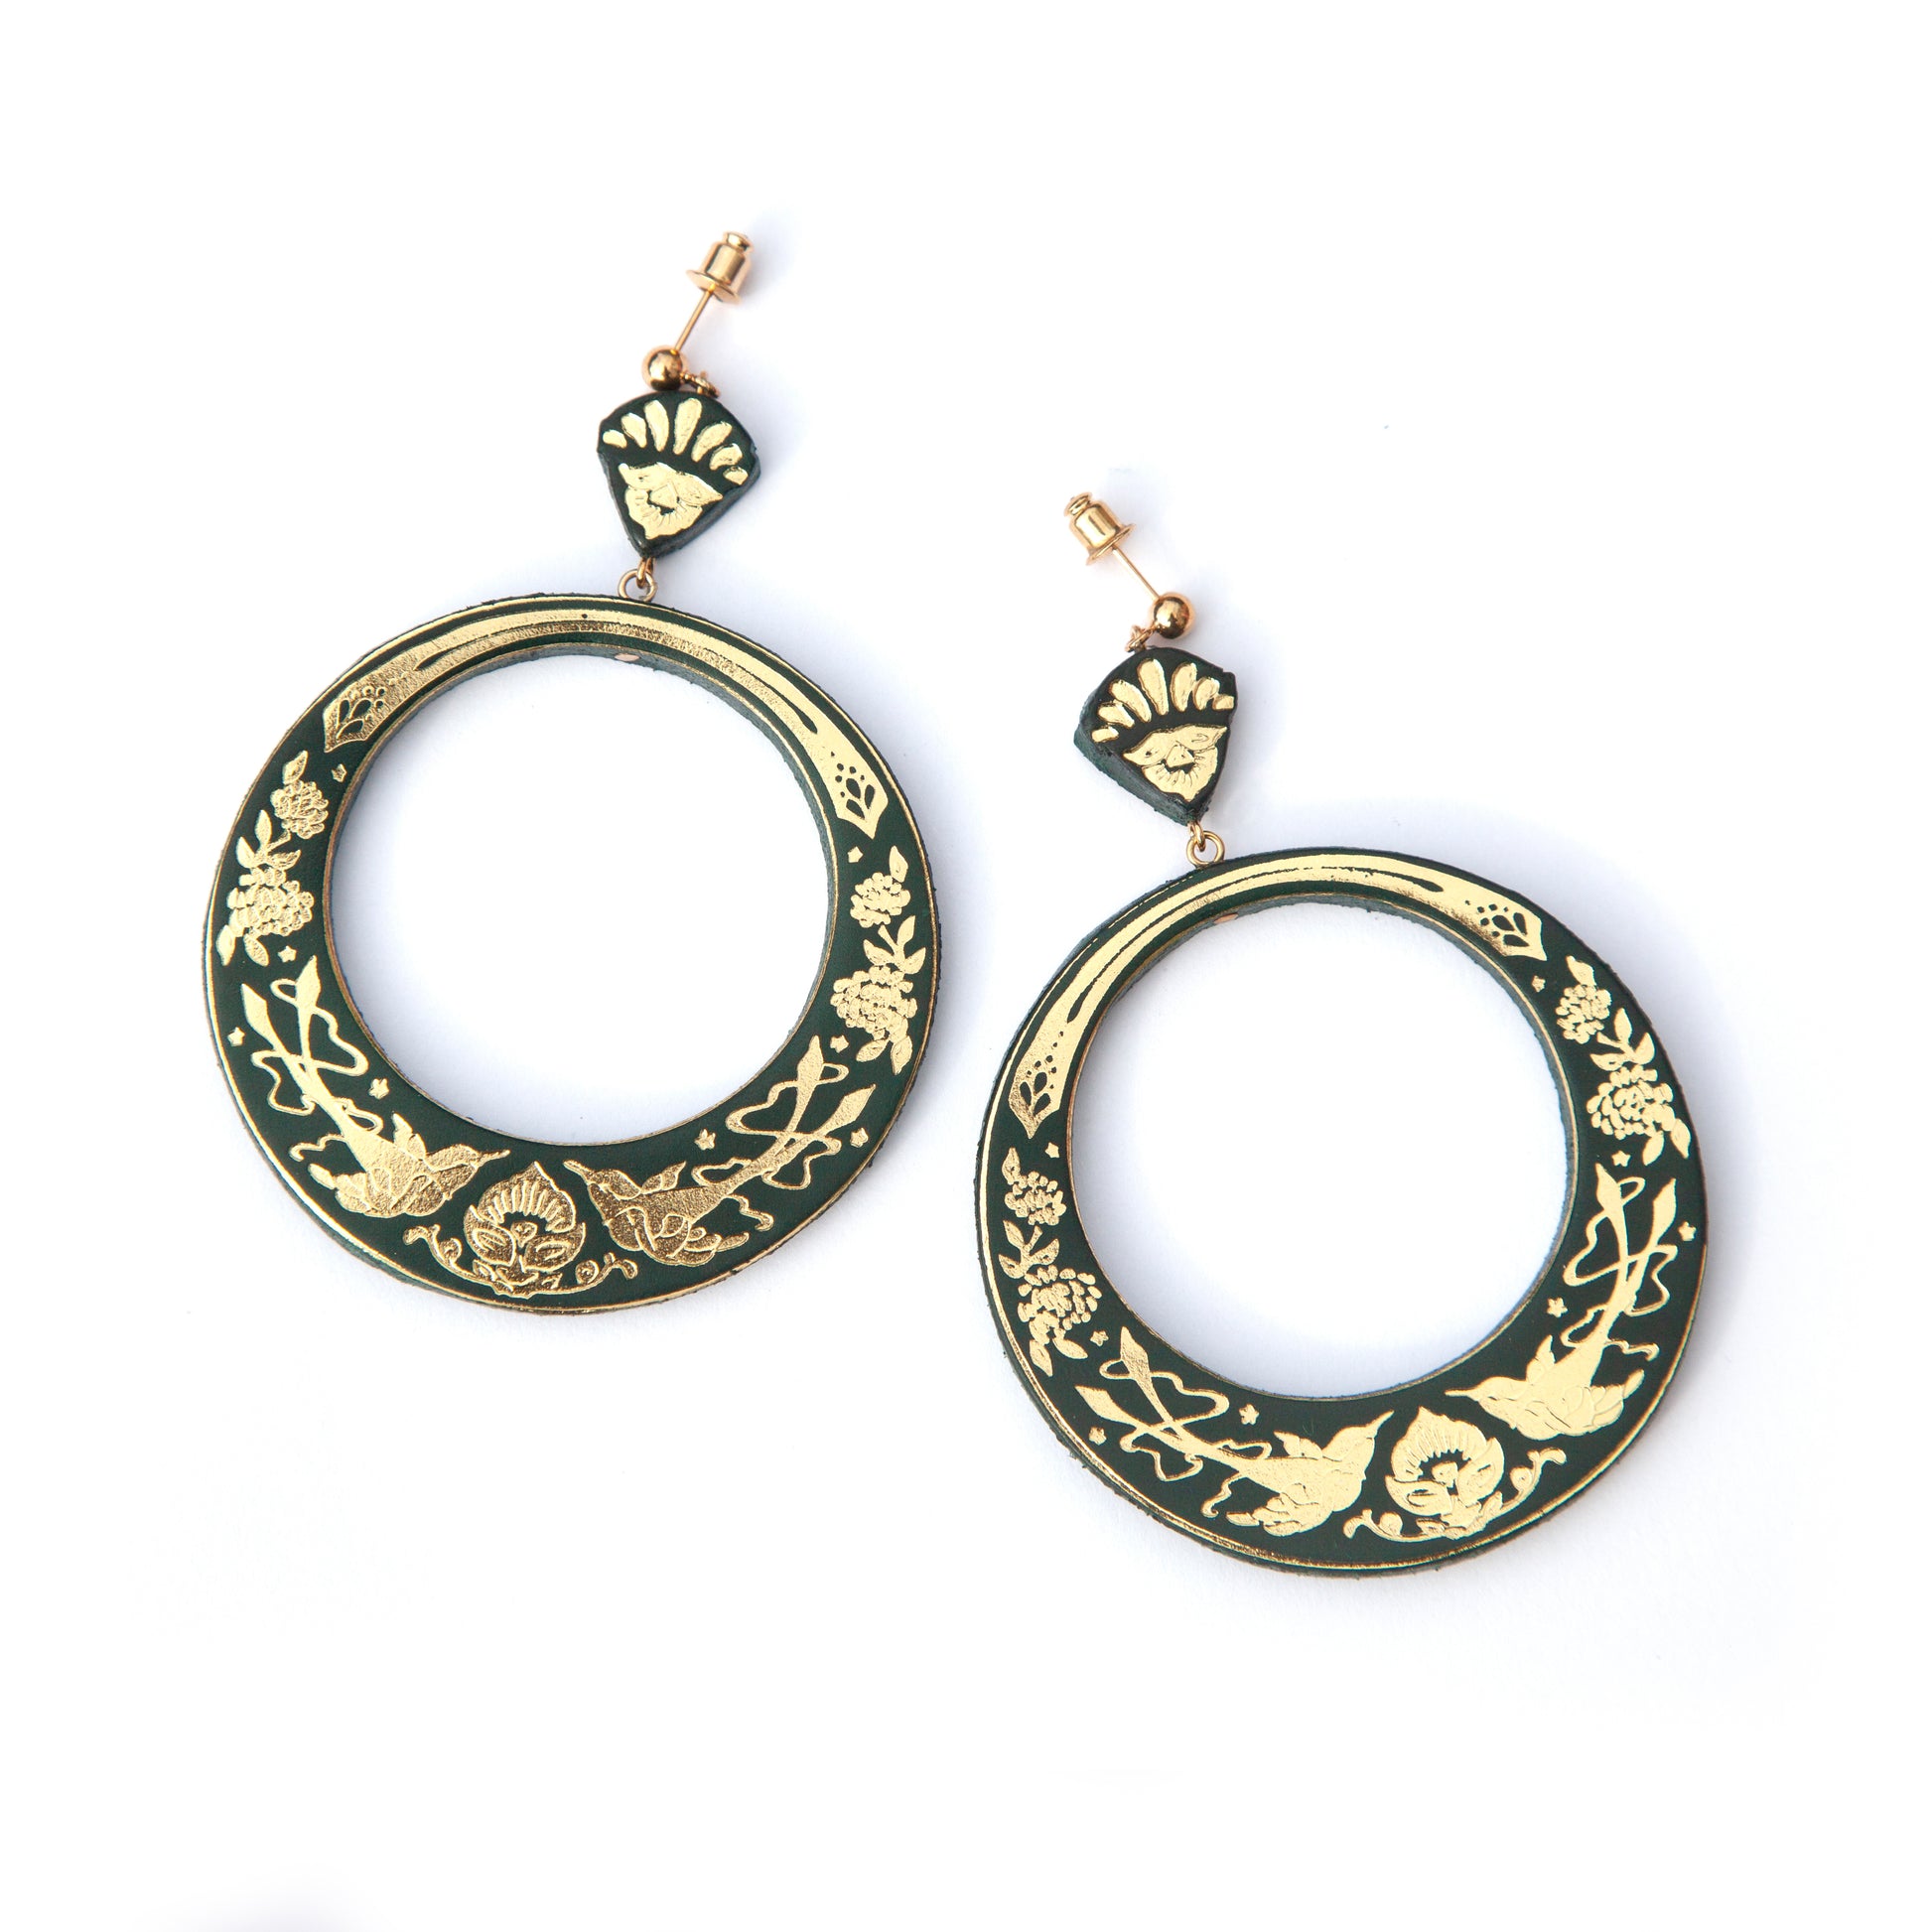 large hoops earring printed with birds & flowers in gold on  dark green leather